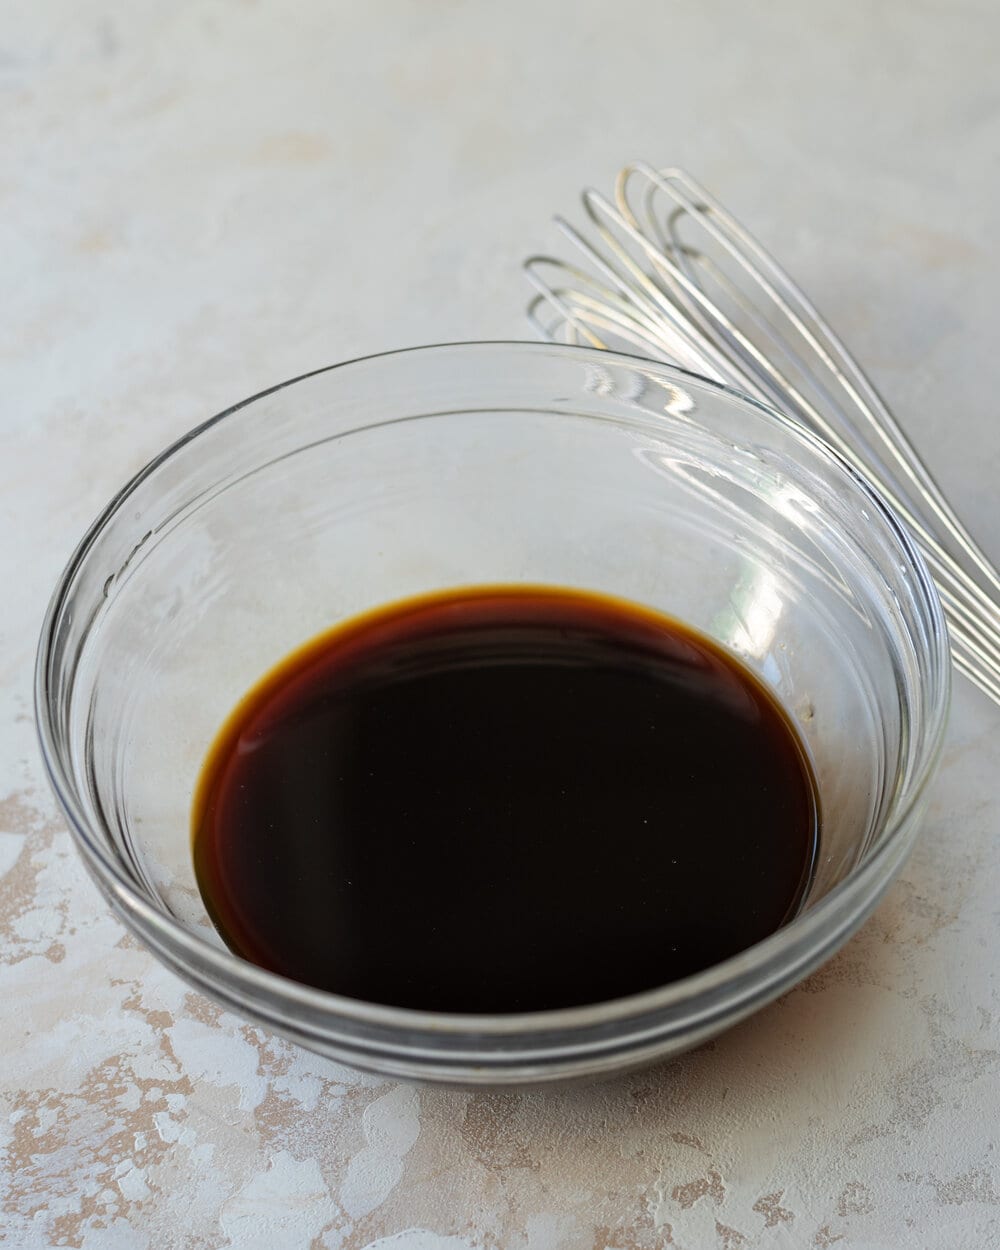 hot coffee and molasses in a glass bowl.